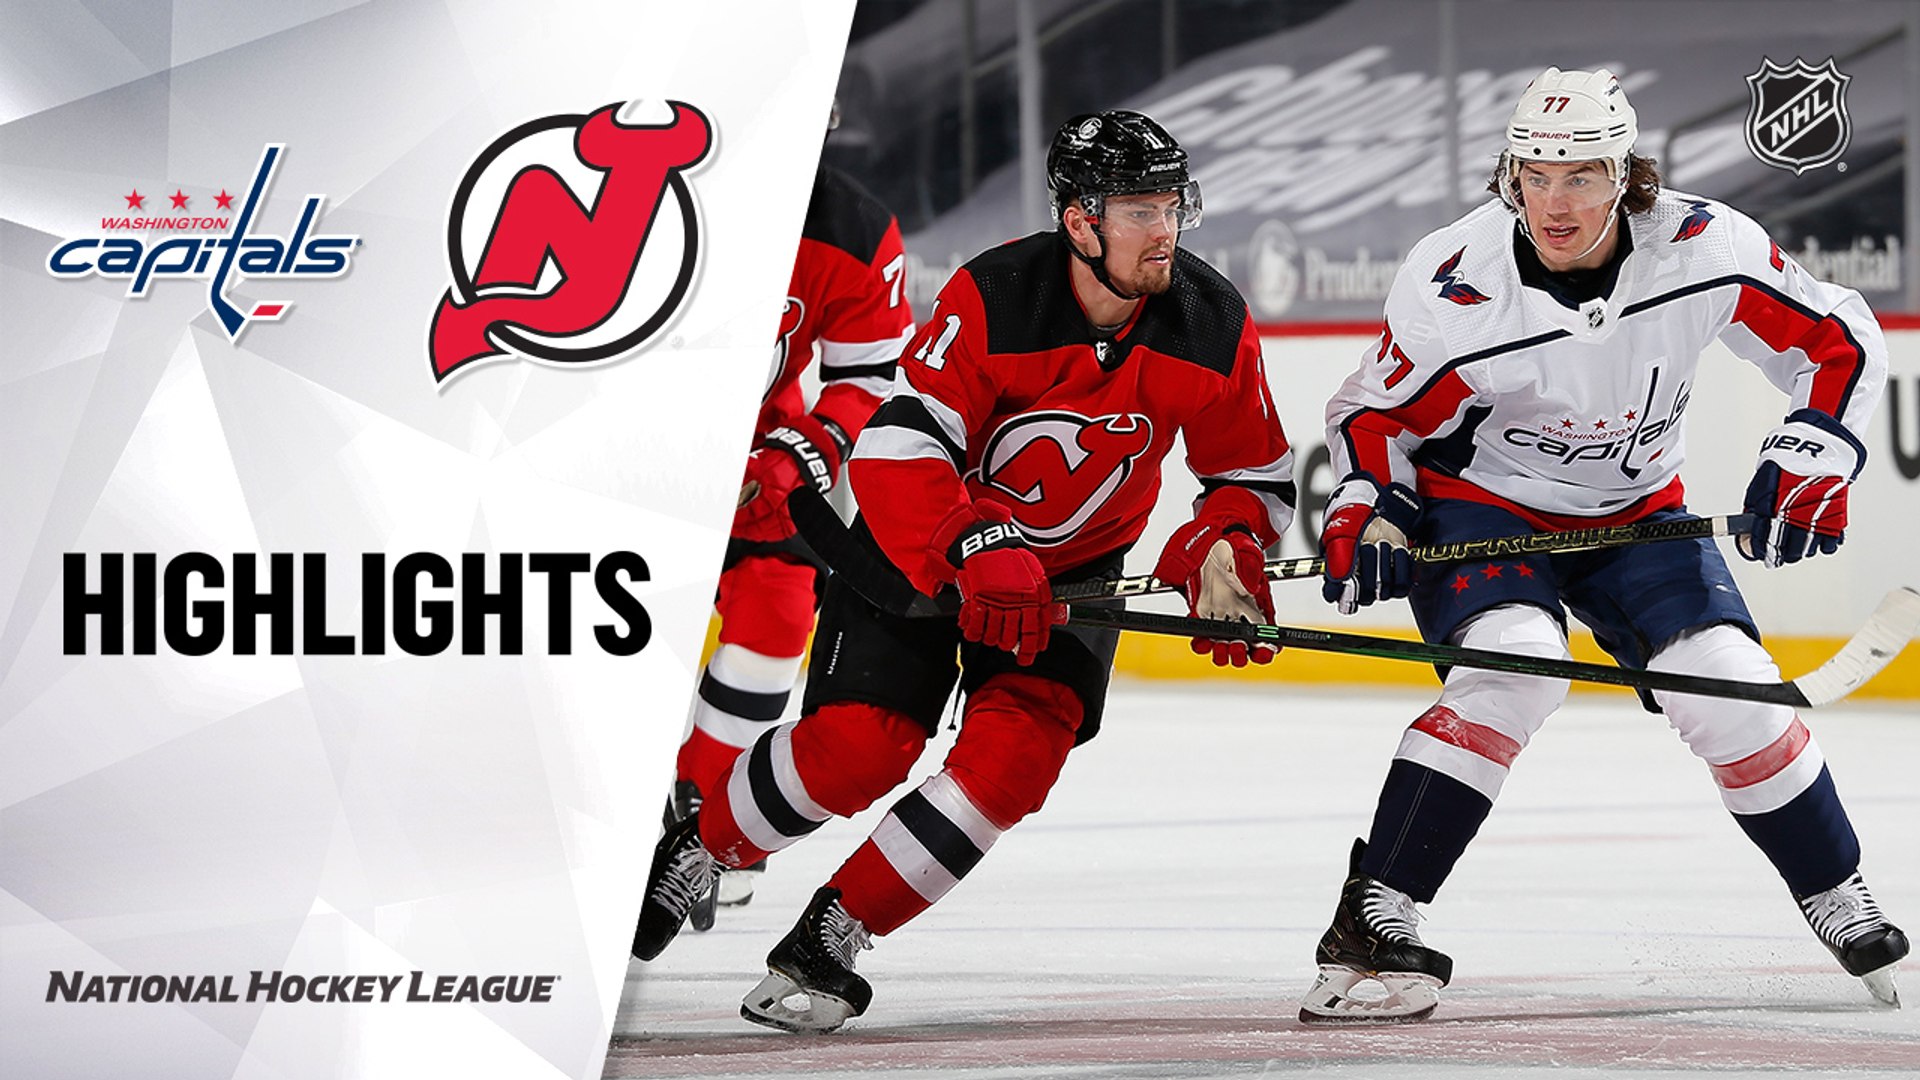 Capitals @ Devils 4/4/21 | NHL Highlights - video Dailymotion